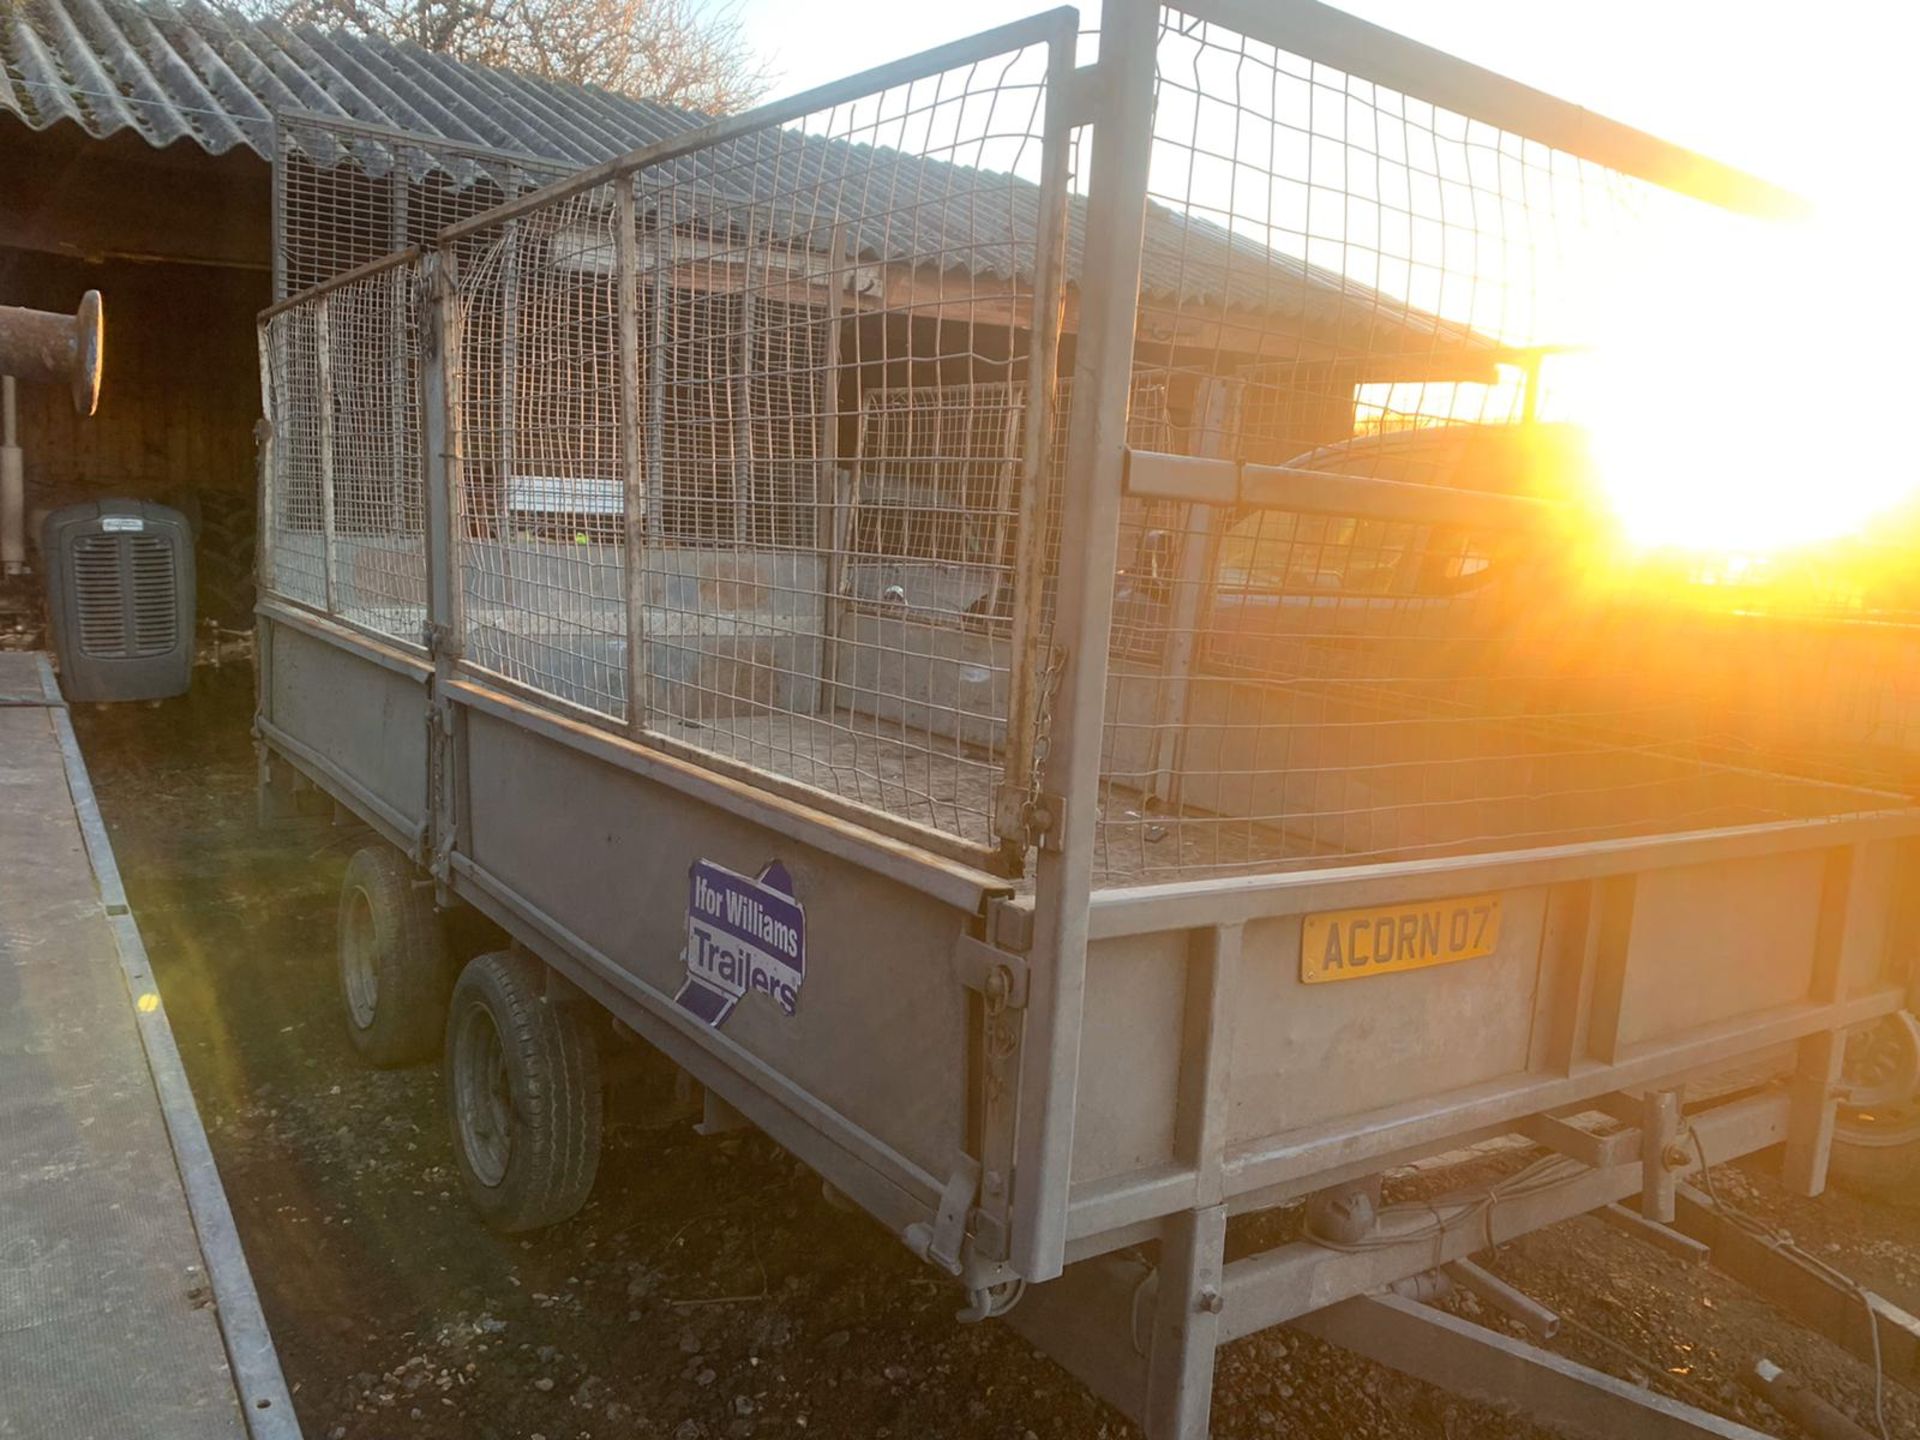 Ifor Williams LM126 cage trailer - Image 3 of 3